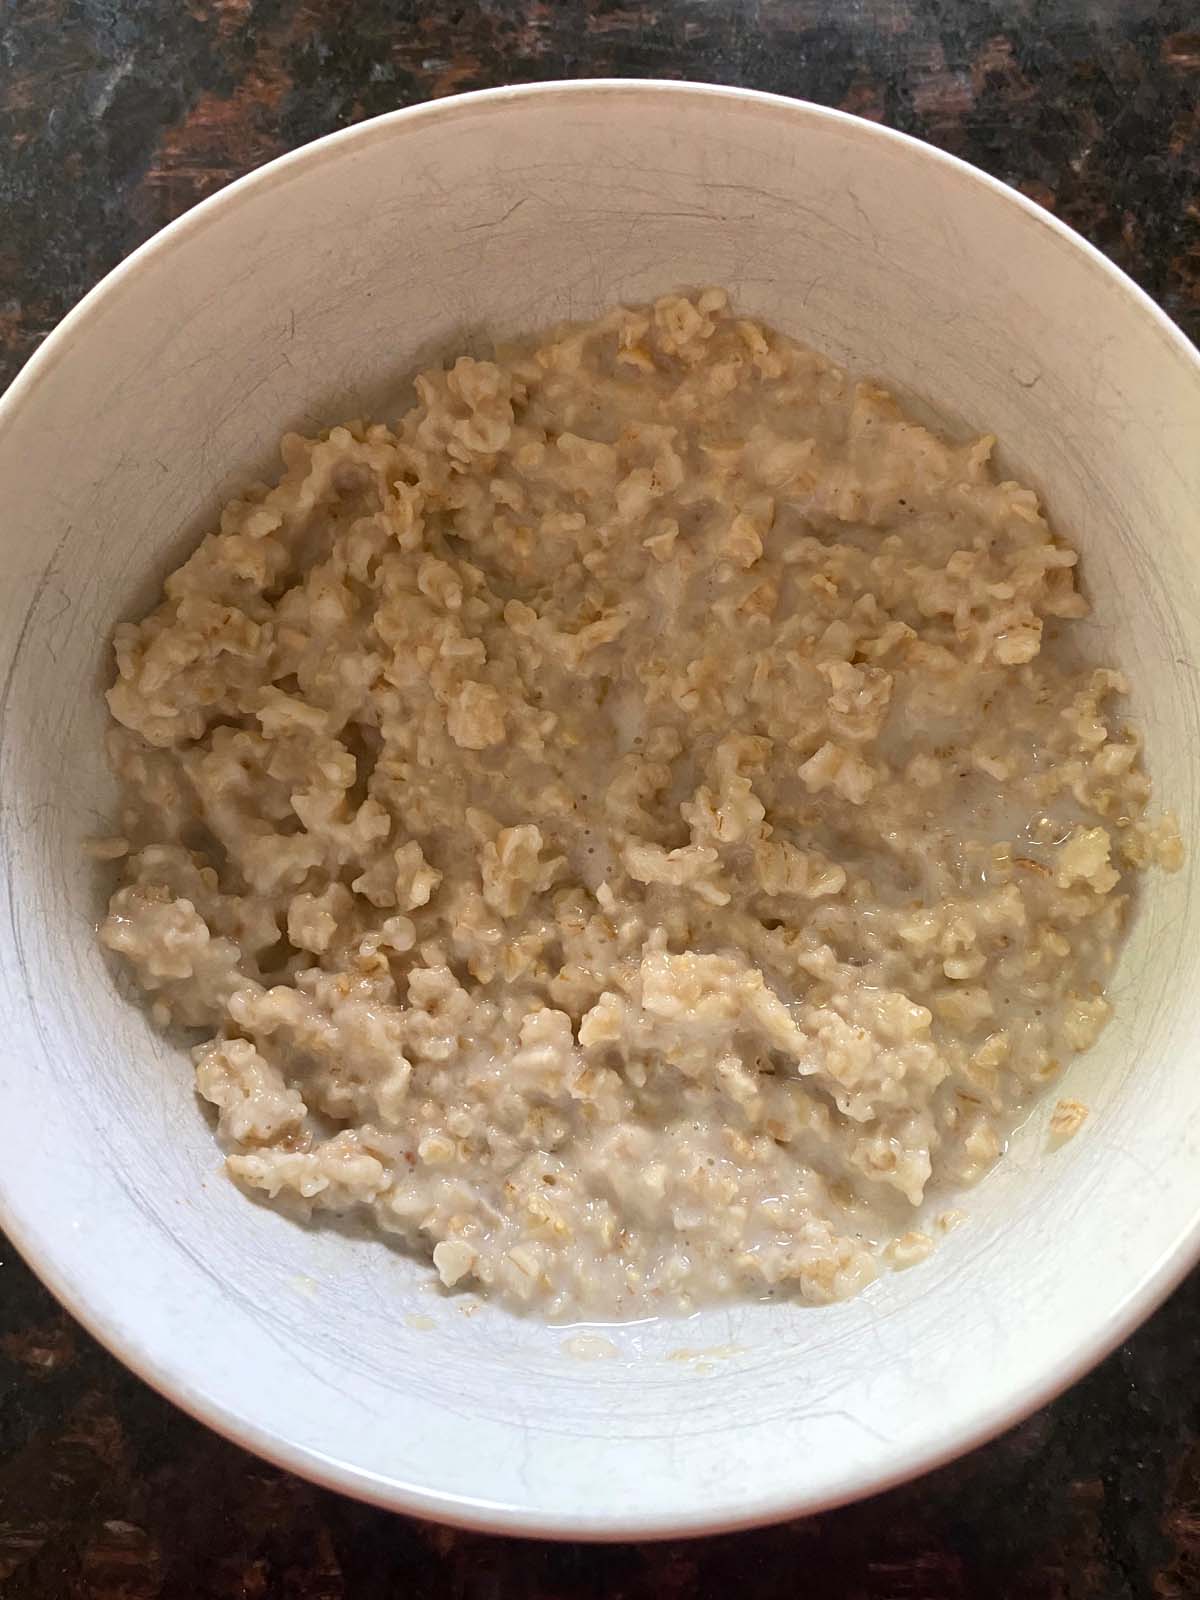 Cooked oatmeal in a white bowl.